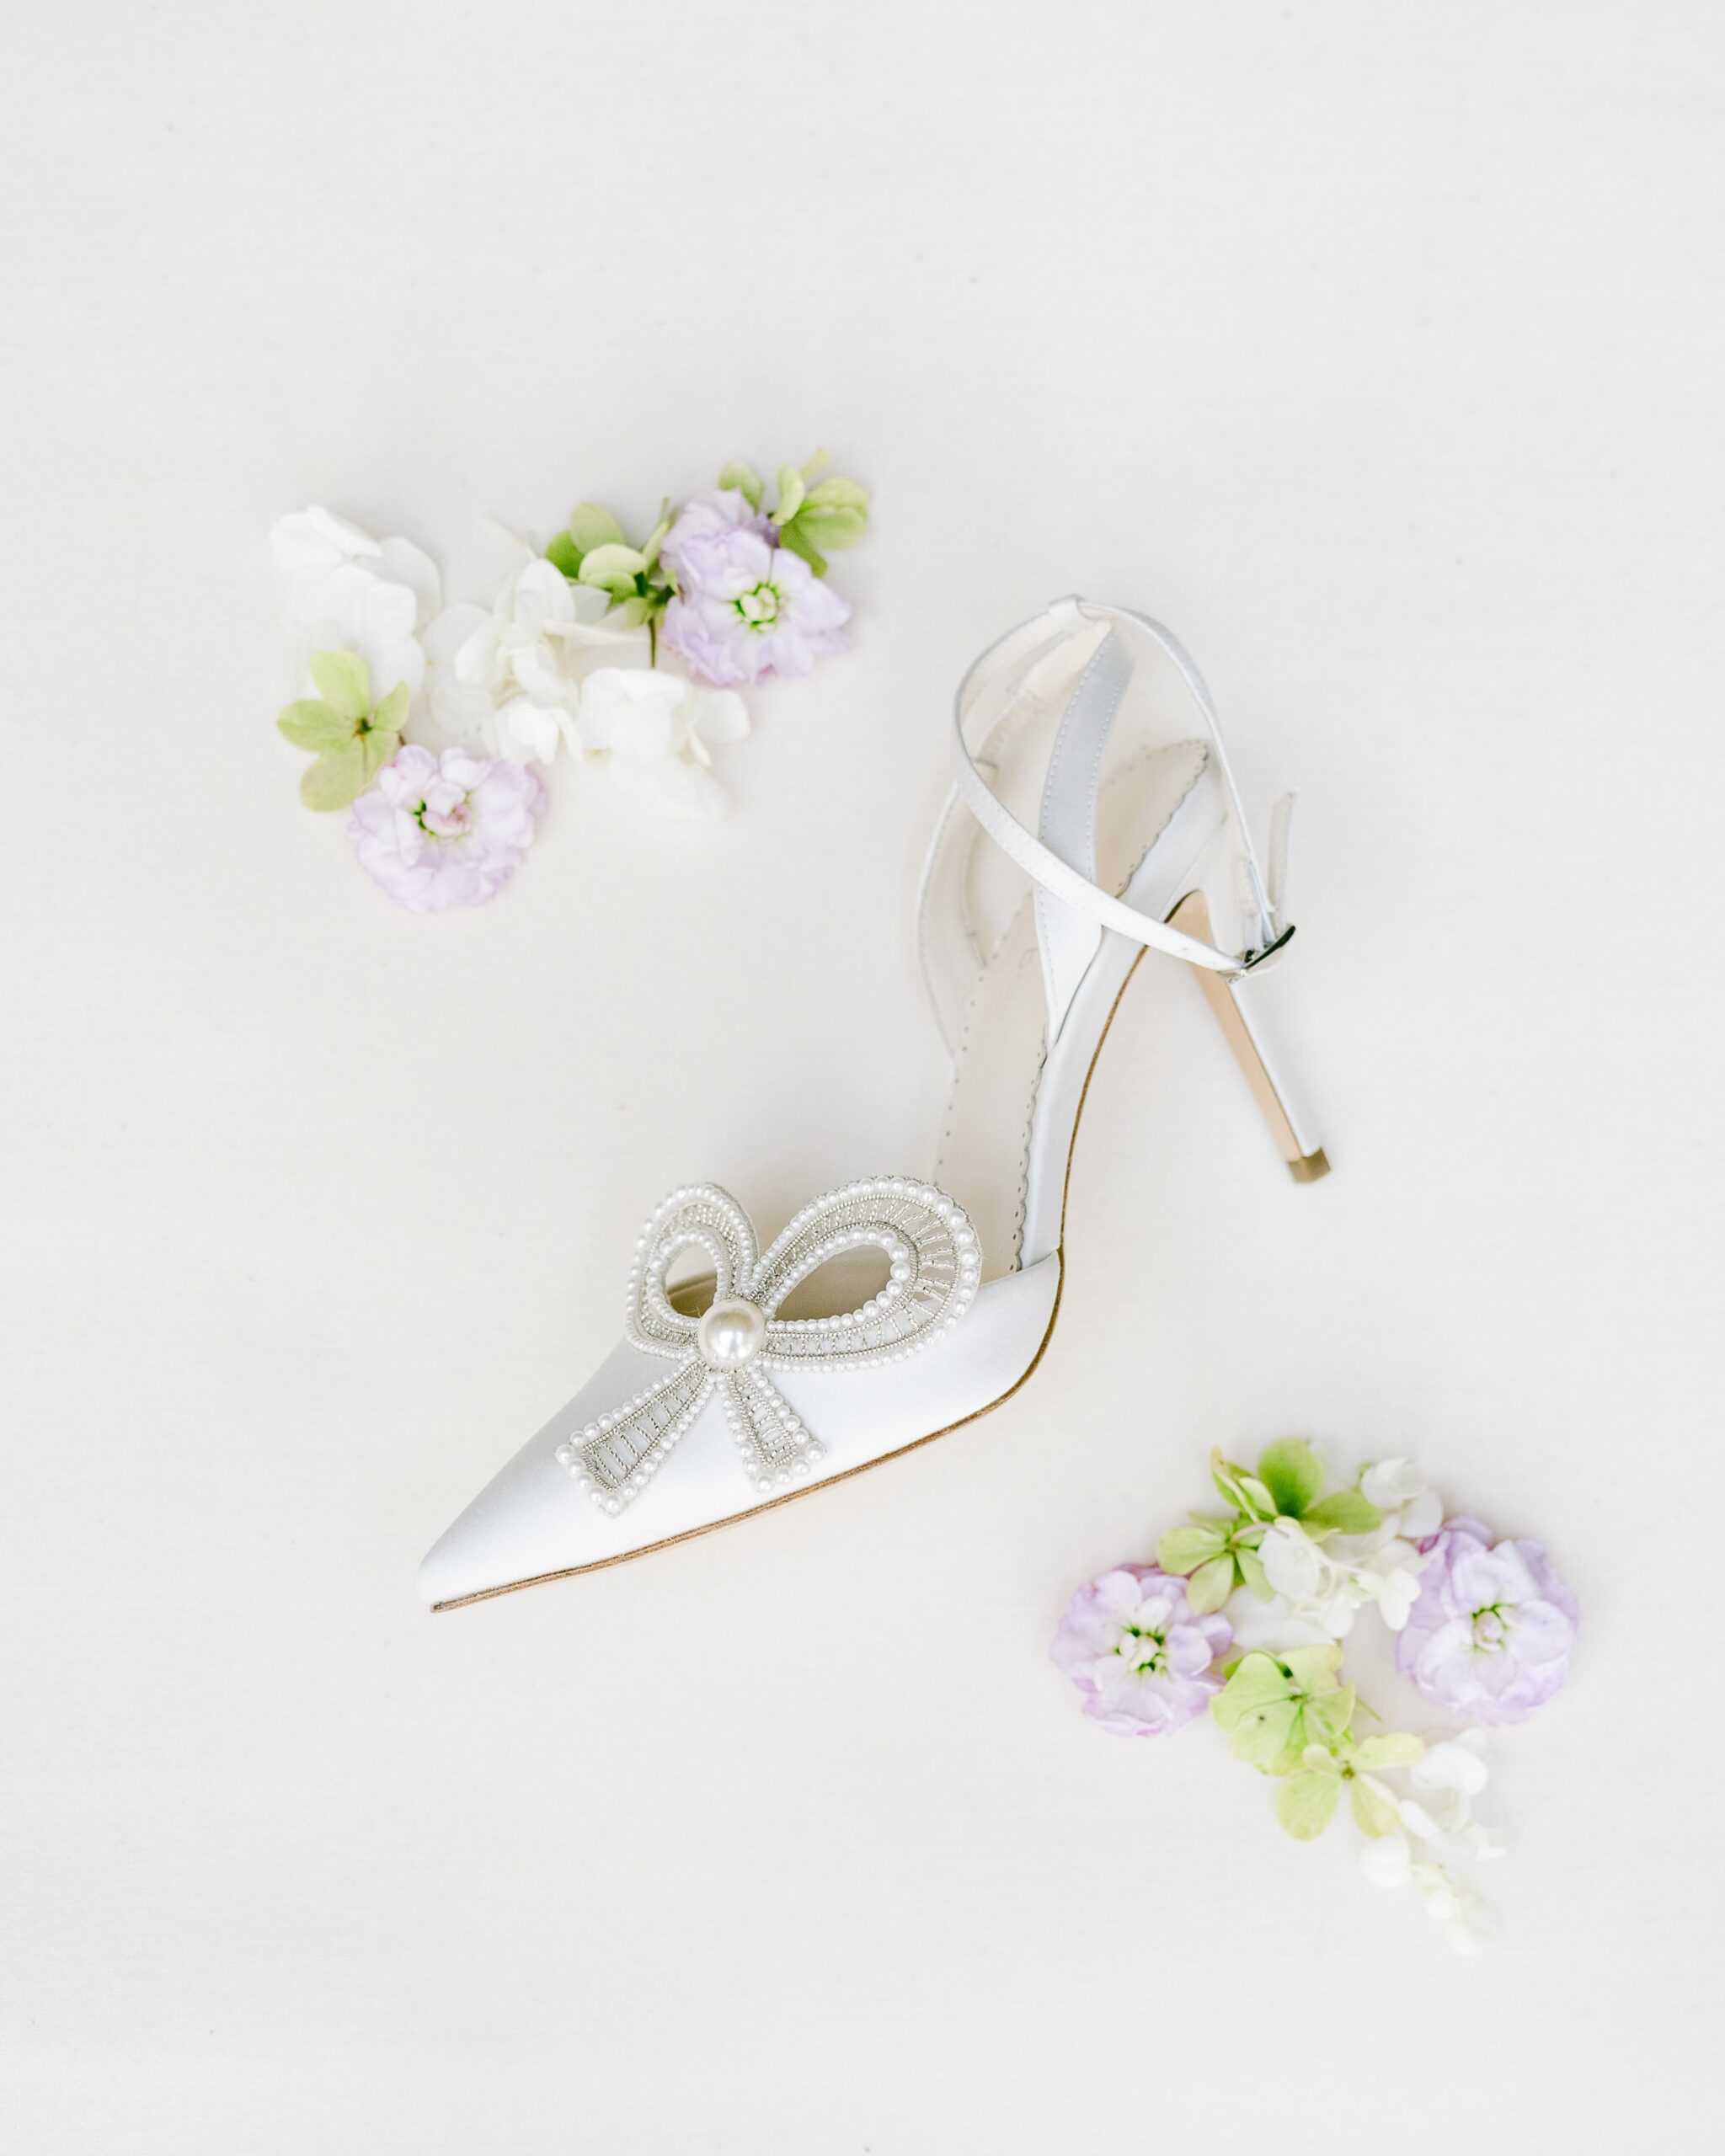 Bella Belle Kenzie bridal shoes by Serenity Photography